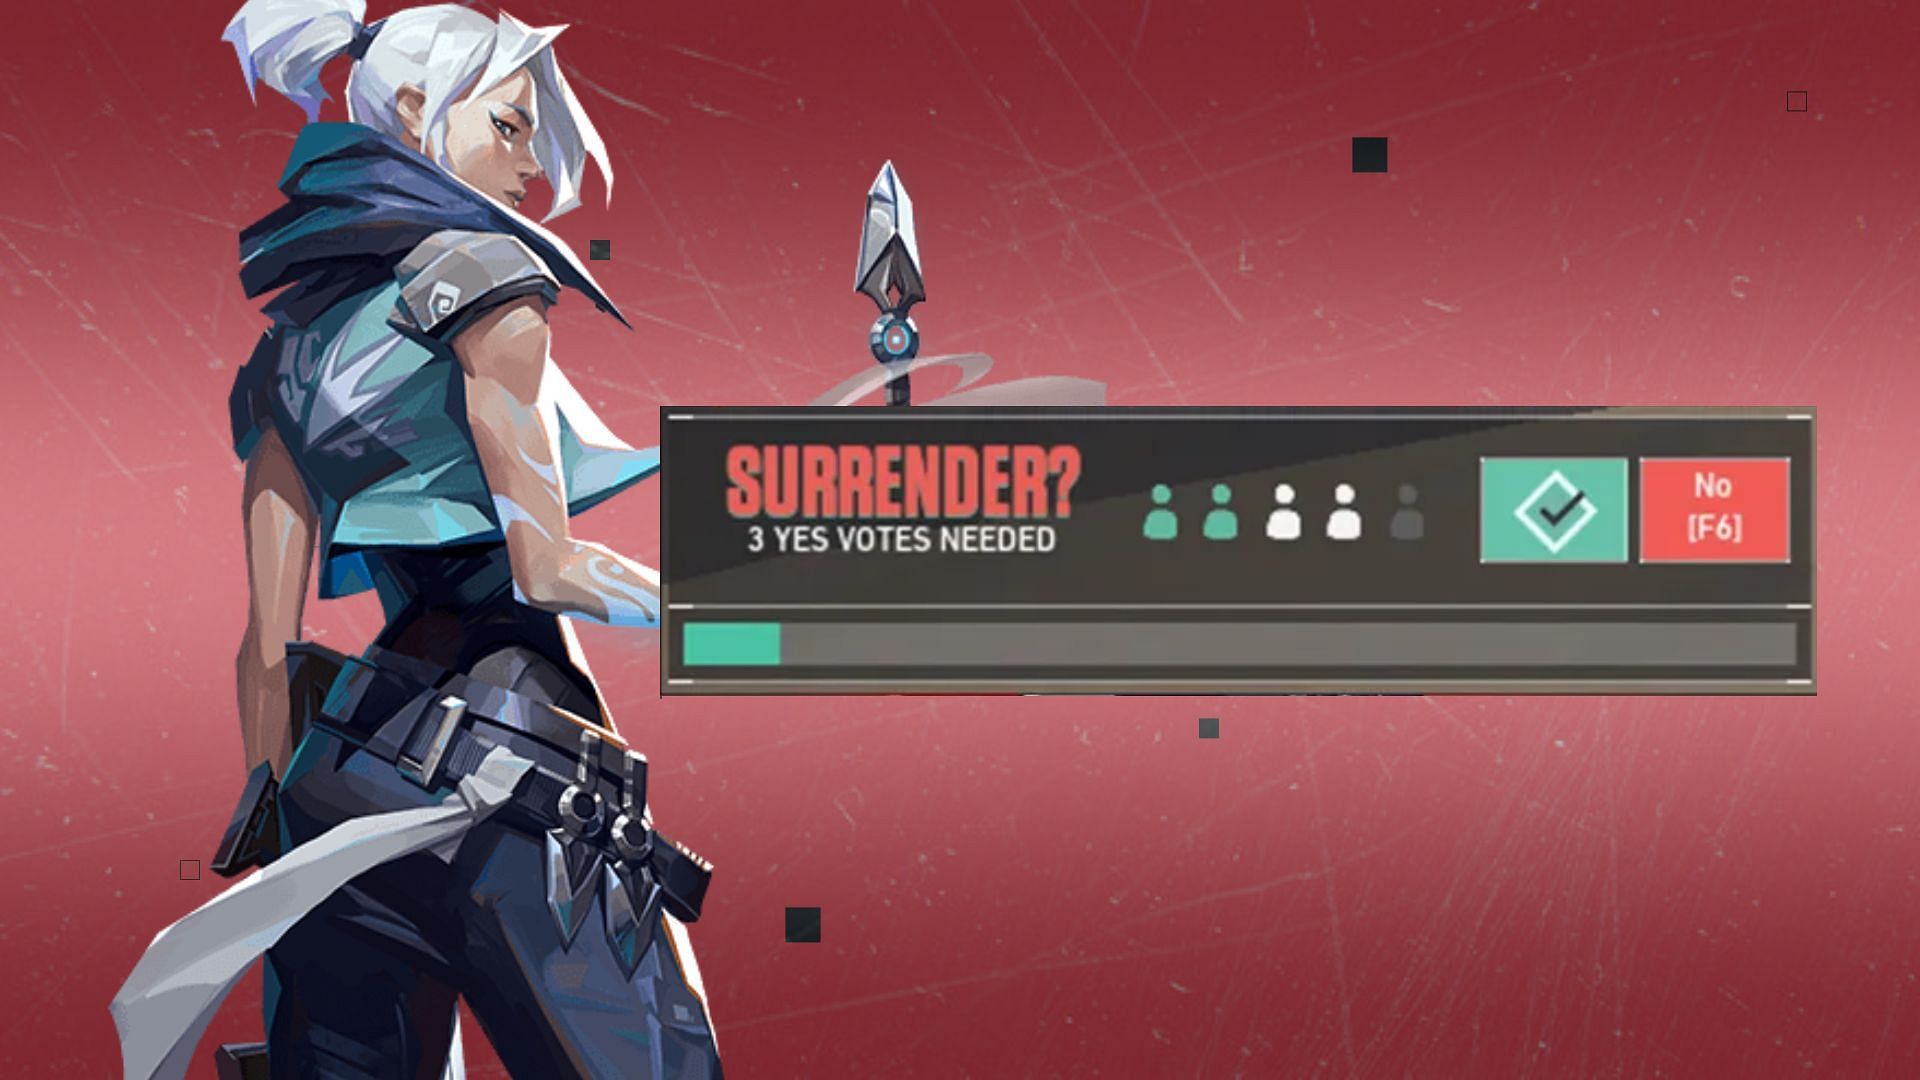 How to surrender in Valorant